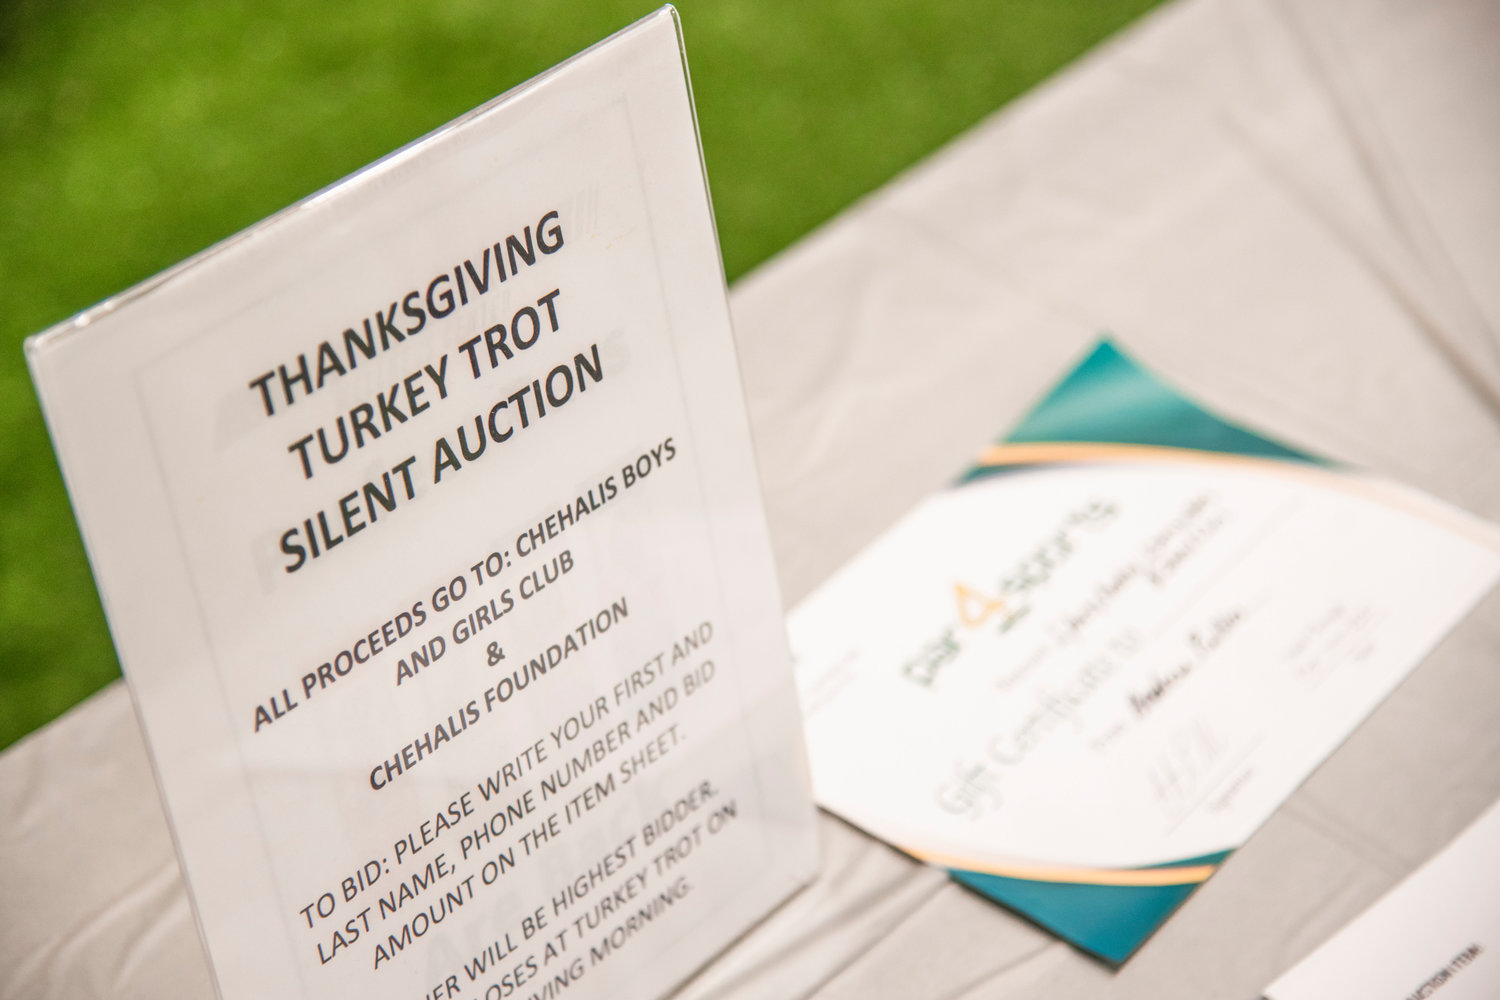 A silent auction was held during a Turkey Trot event at the Chehalis Thorbeckes on Thanksgiving Day.